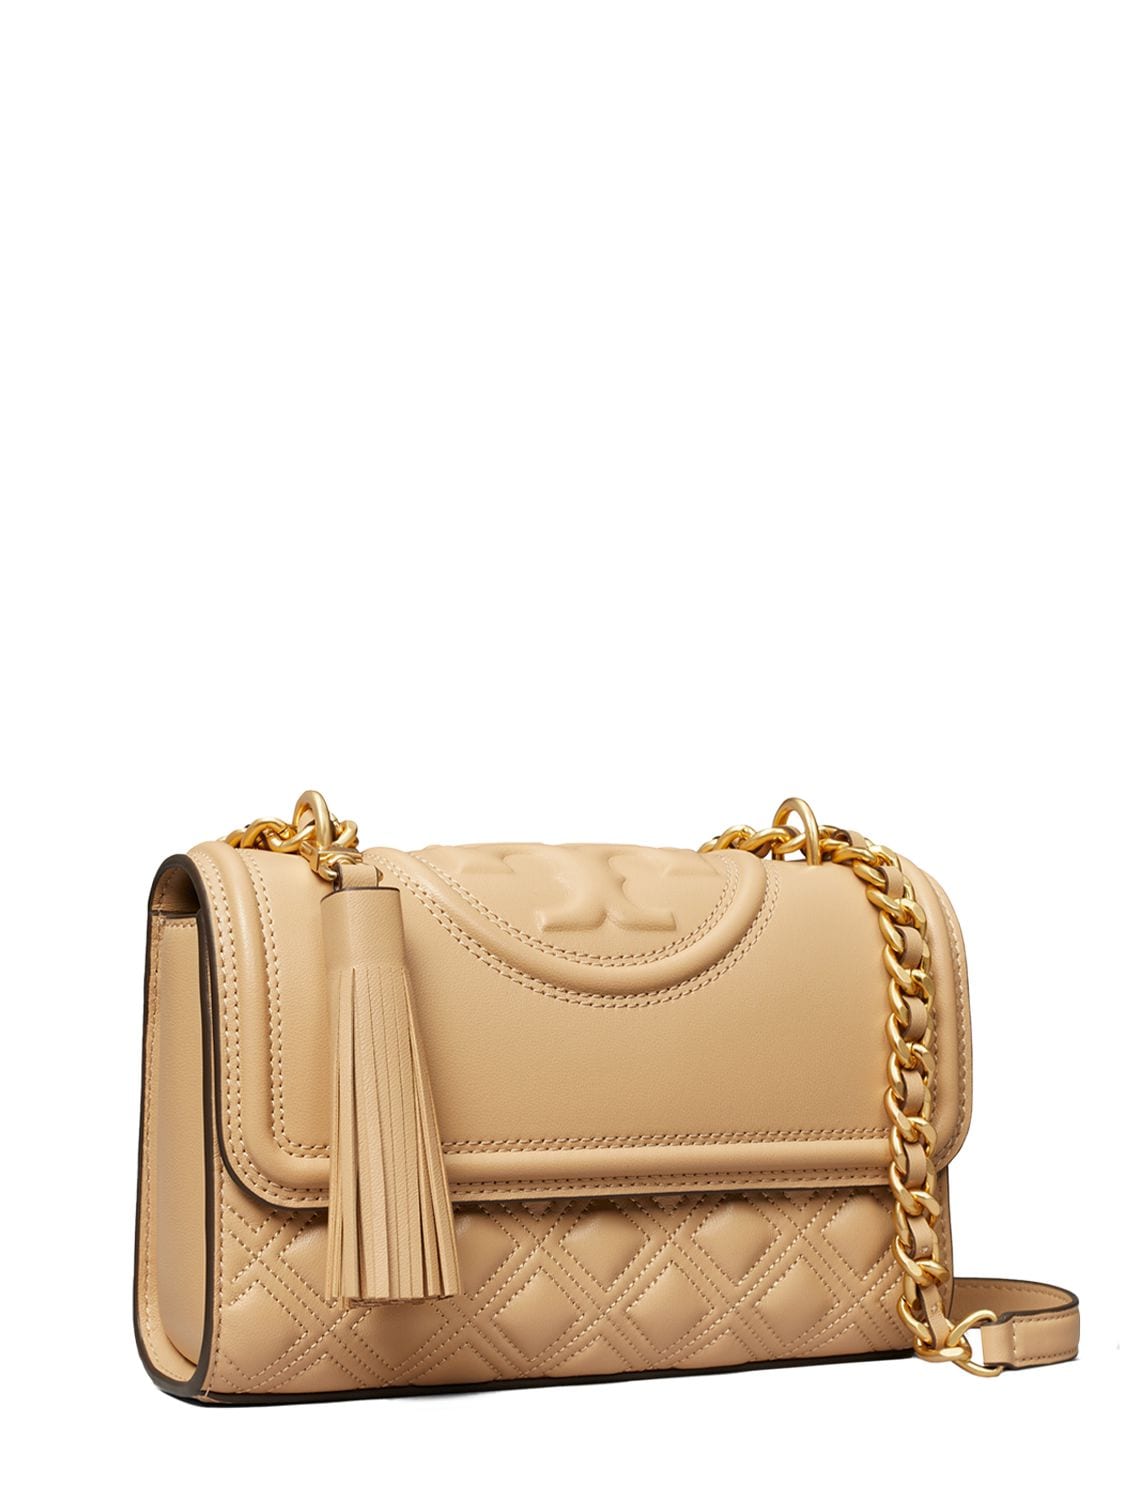 Tory Burch Butternut Fleming Straw Convertible Shoulder Bag, Best Price  and Reviews